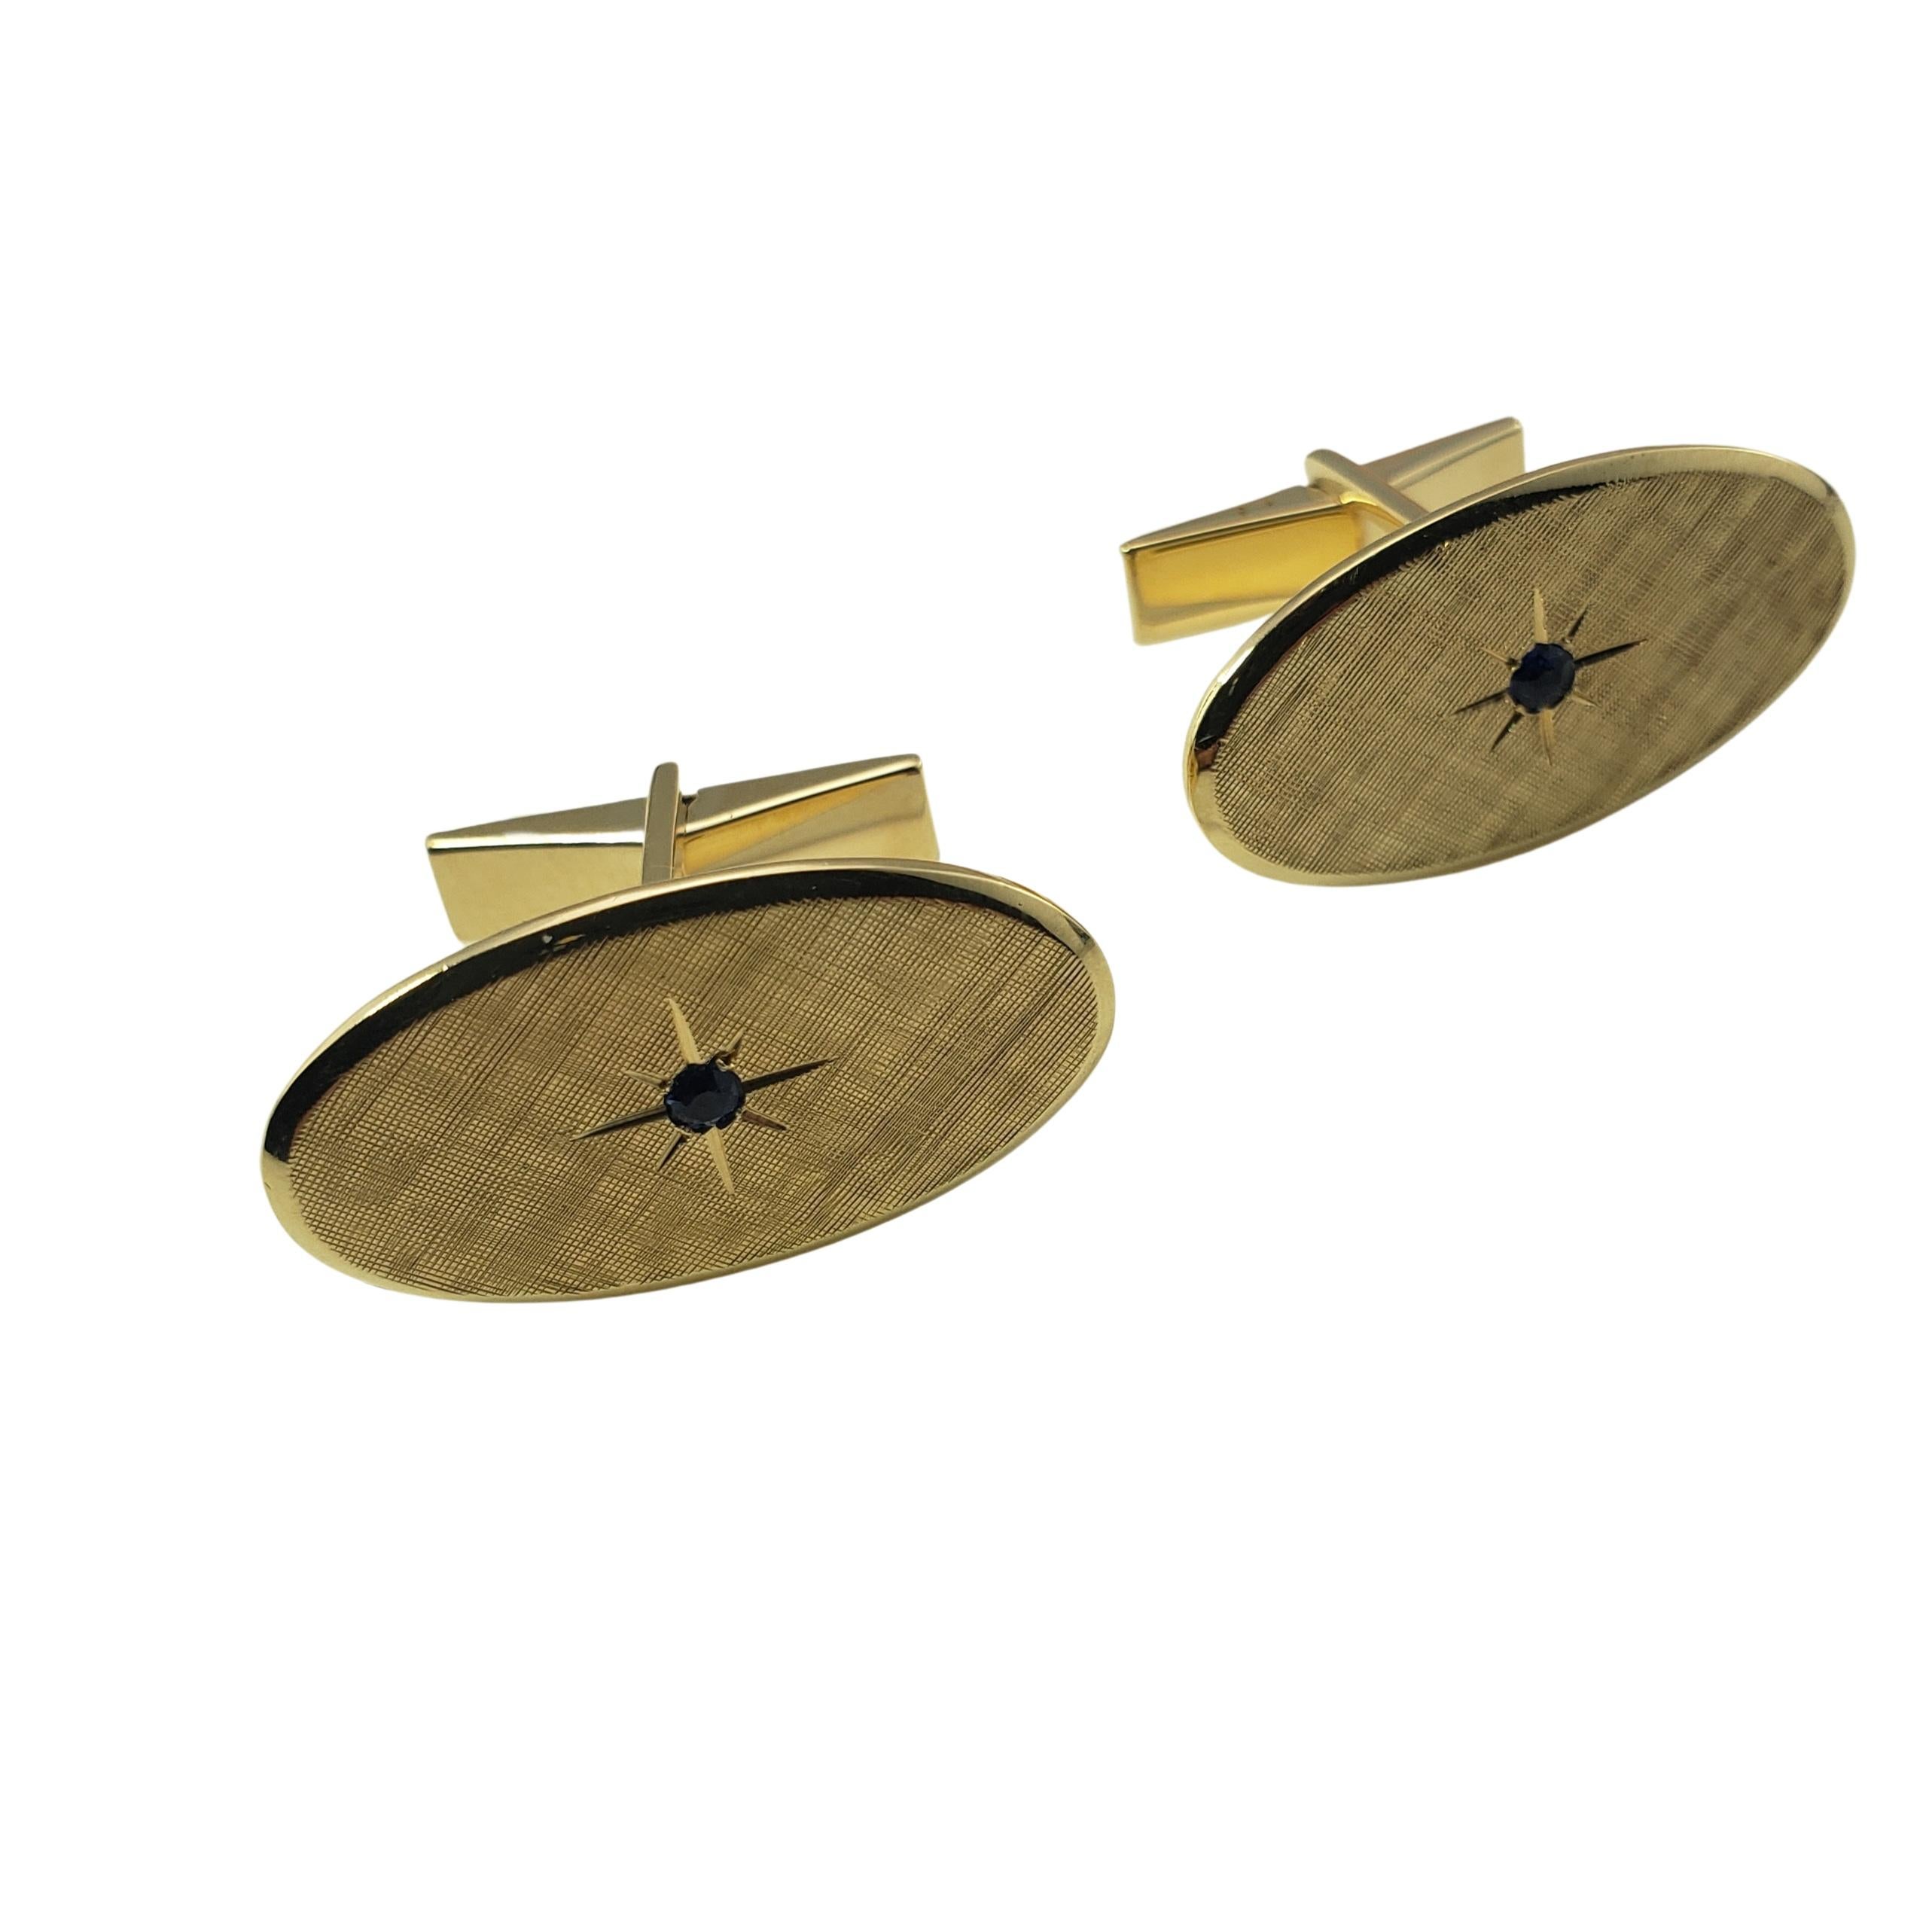 Tiffany & Co. 14 Karat Yellow Gold and Sapphire Cufflinks-

These elegant cufflinks by Tiffany & Co. each feature one round sapphire (2 mm) set in beautifully detailed 14K yellow gold.  

*Matching tie pin: RL-00011920

Size: 1 inch x 1/2